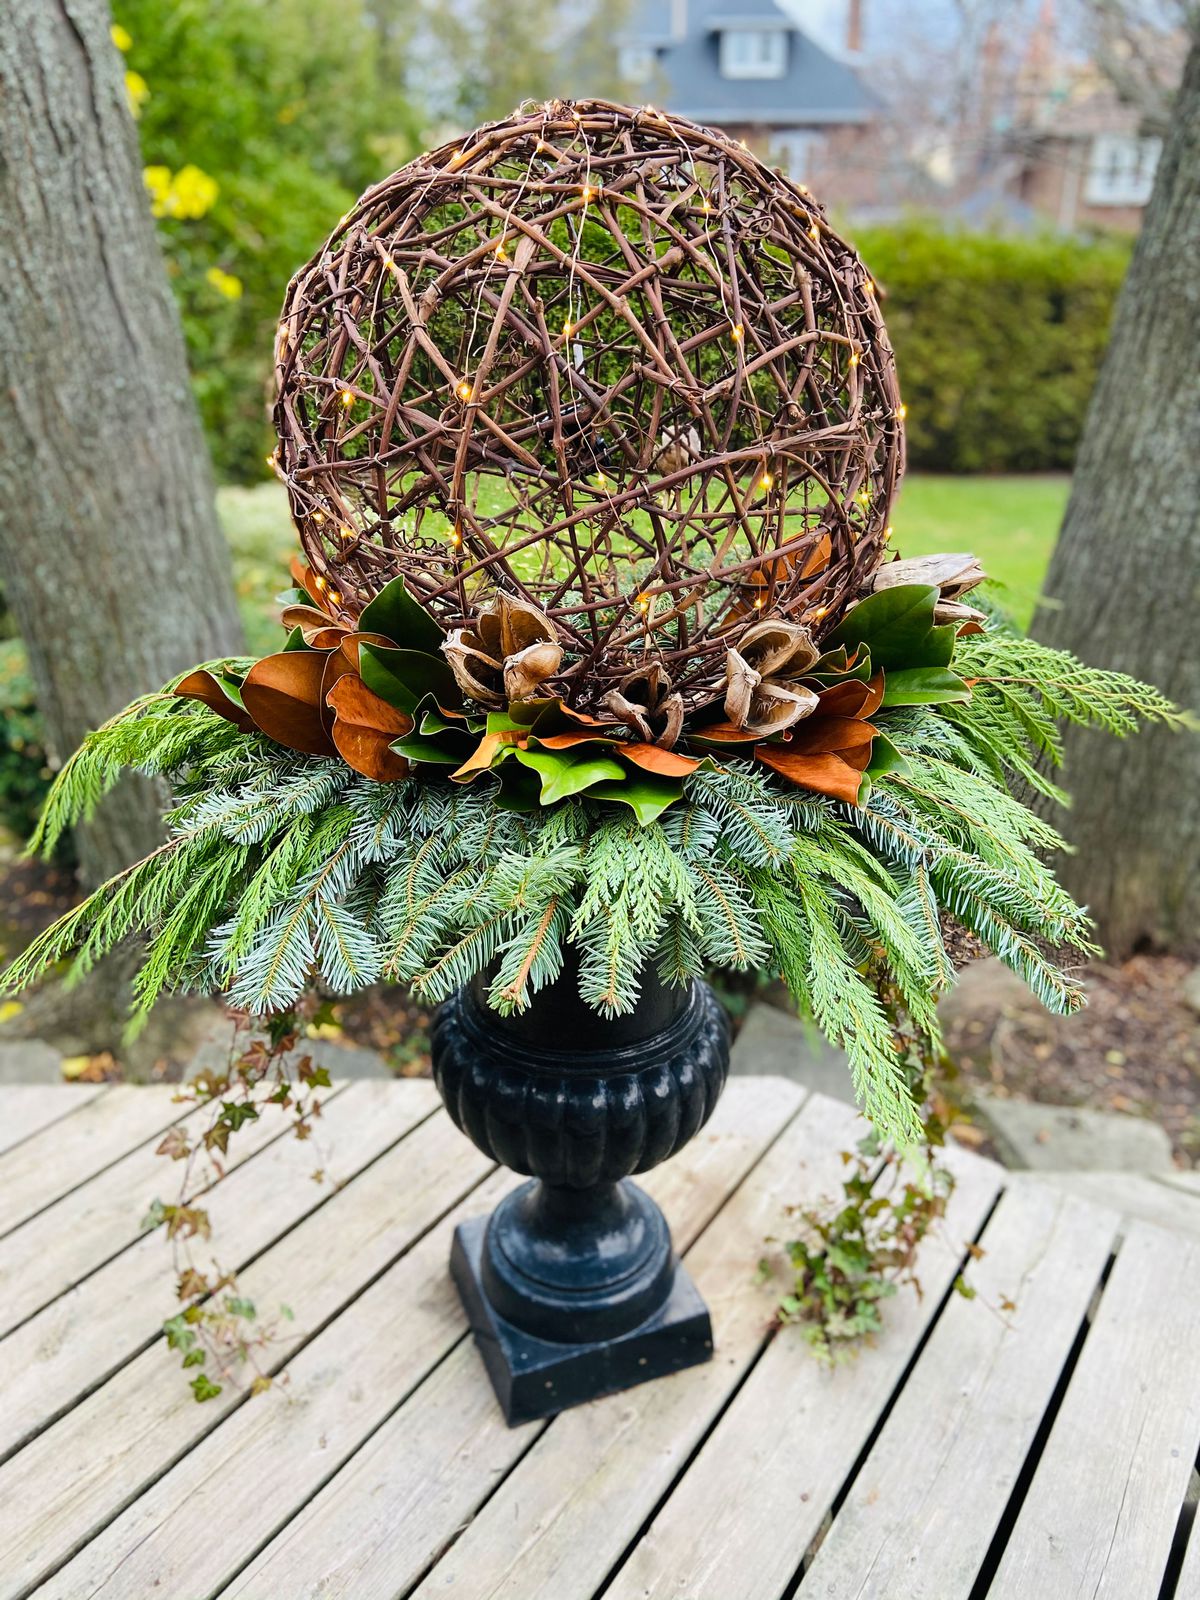 A winter topiary with a grape vine ball on top.